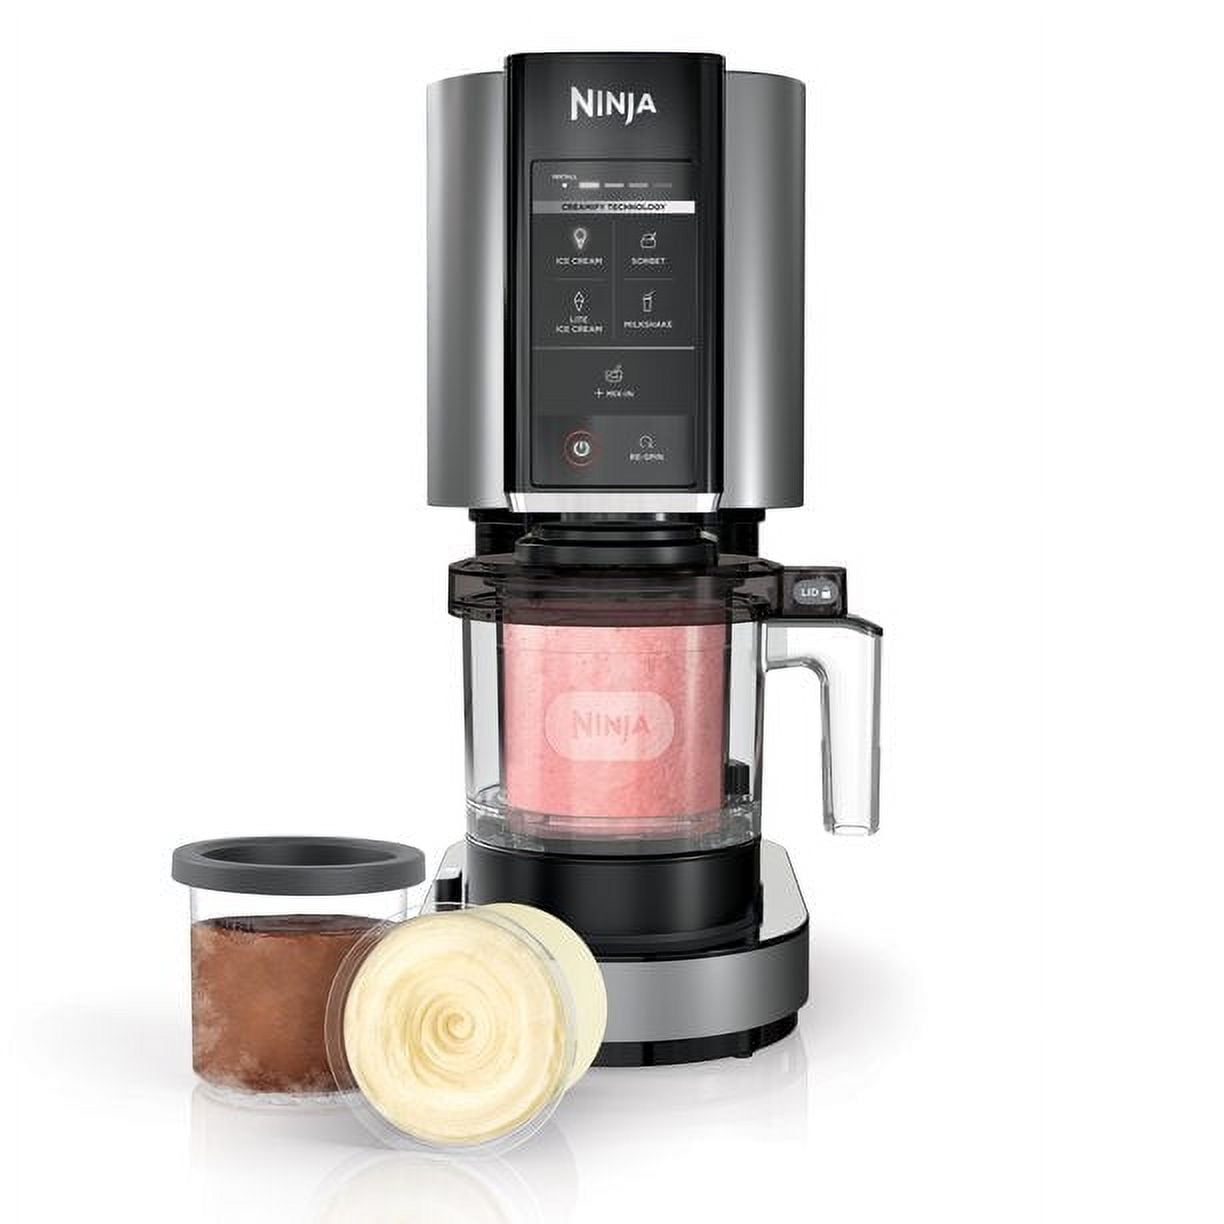  Ninja CN301CO CREAMi Ice Cream Maker, for Gelato, Mix-ins,  Milkshakes, Sorbet, Smoothie Bowls & More, 7 One-Touch Programs, with (3)  Pint Containers & Lids, Compact Size, Perfect for Kids, Black (Renewed)